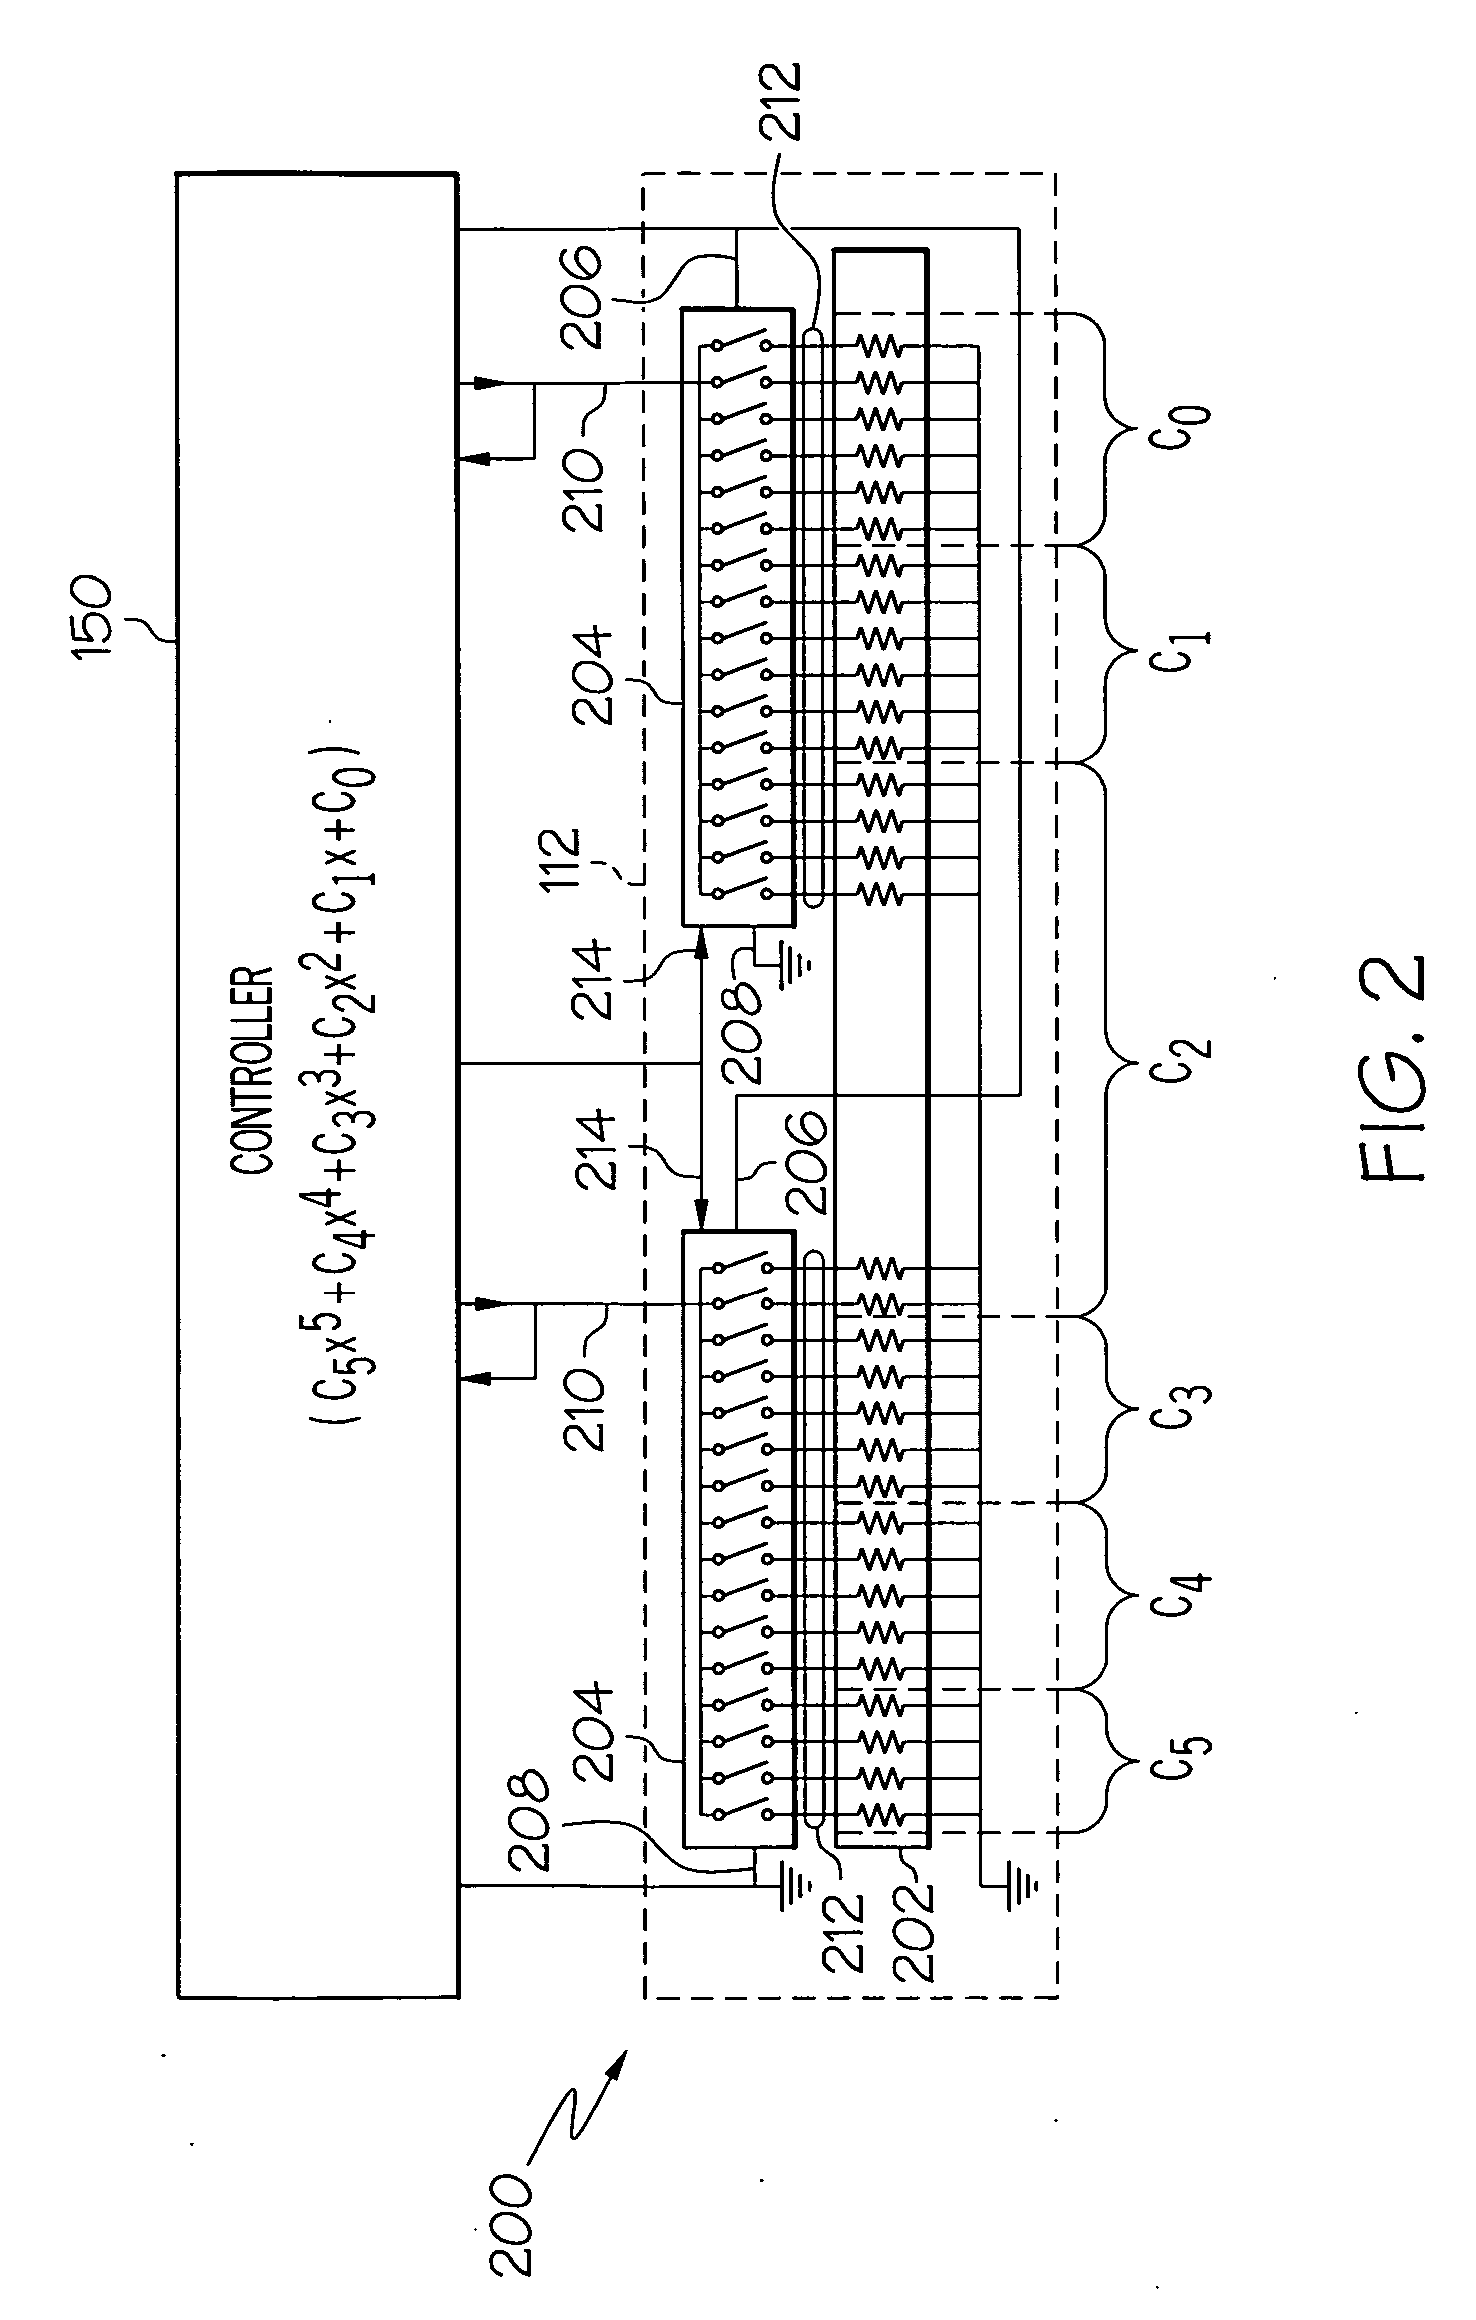 Enhanced accuracy fuel metering system and method